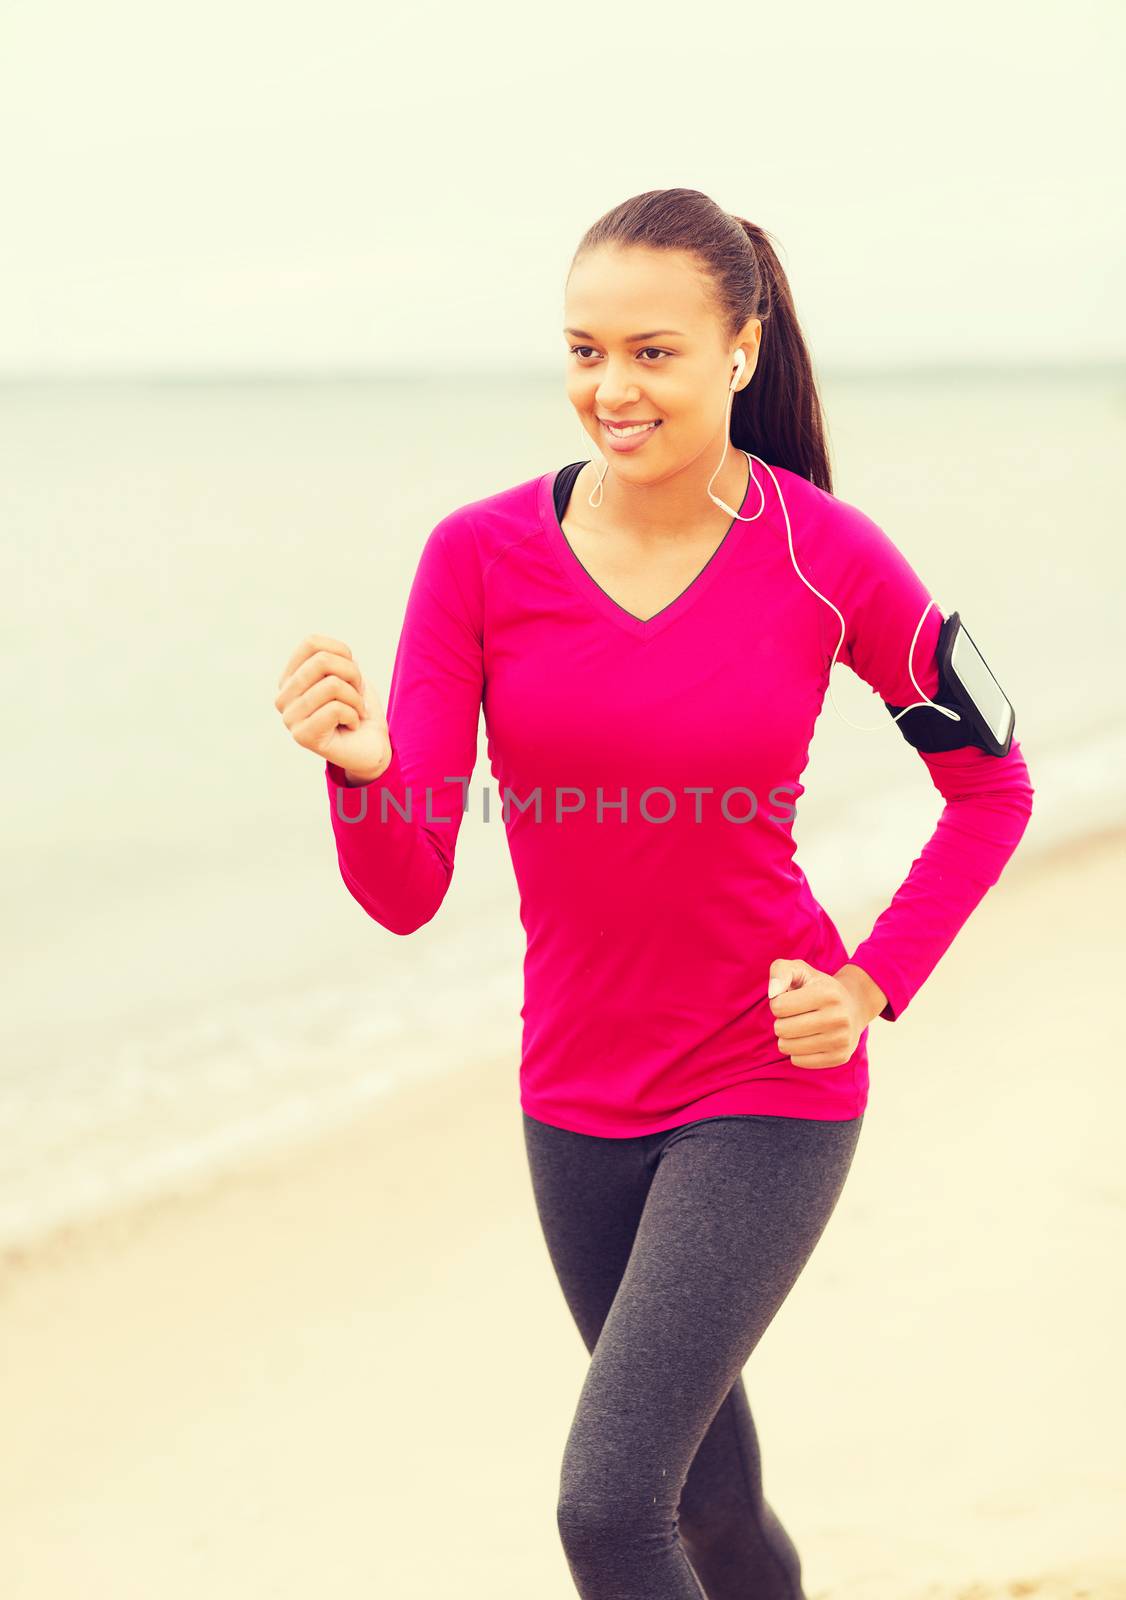 smiling young woman running outdoors by dolgachov